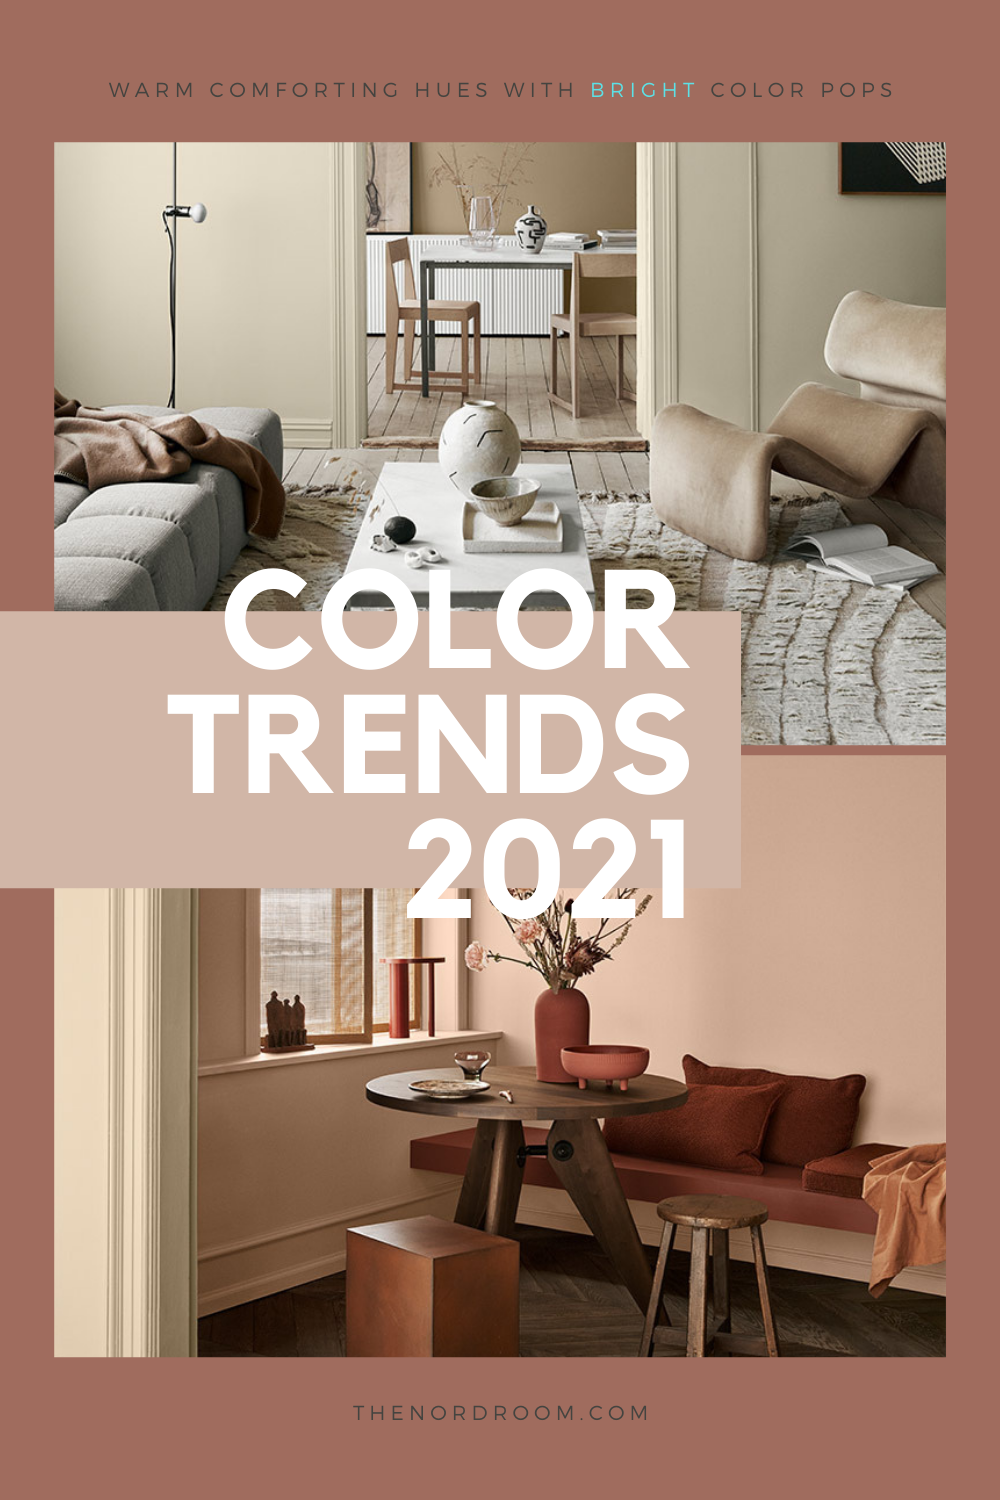 The Color Trends For 2021 Warm Comforting Hues And Bright Color Pops The Nordroom